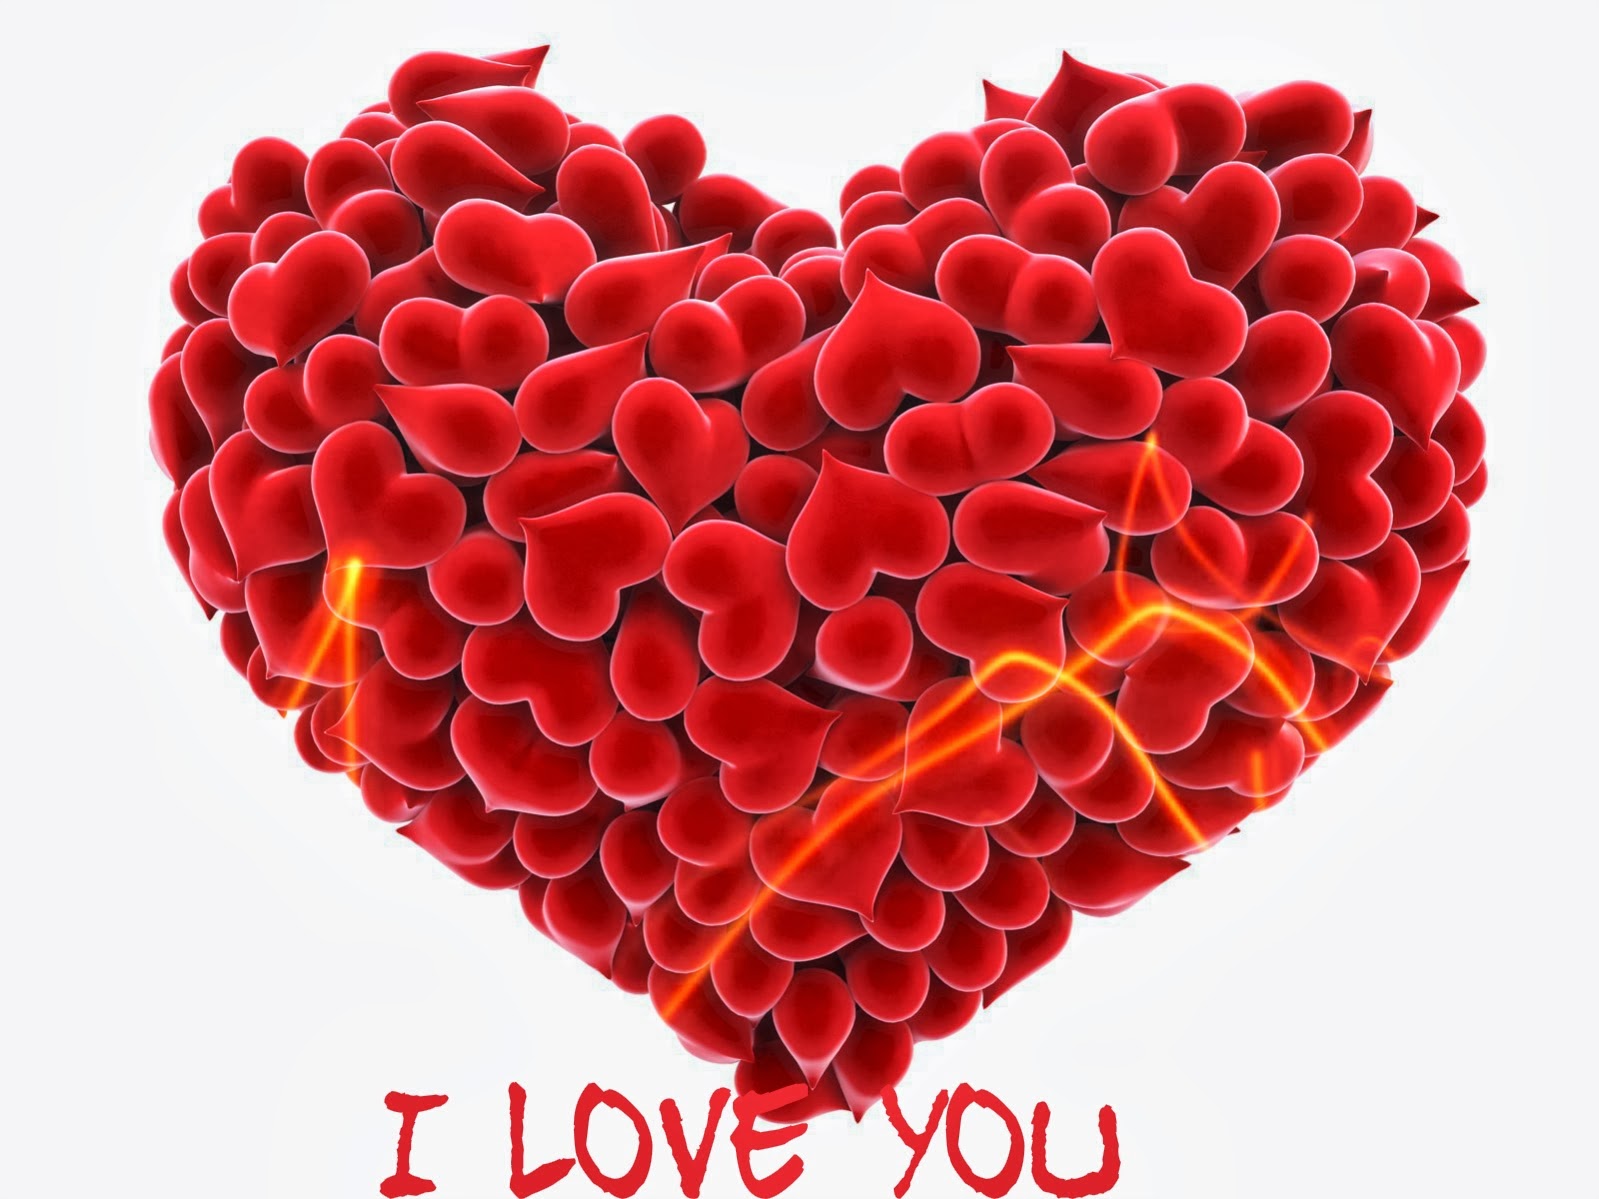 Download I Love You Wallpaper For Iphone #hl5uw » hdxwallpaperz.com